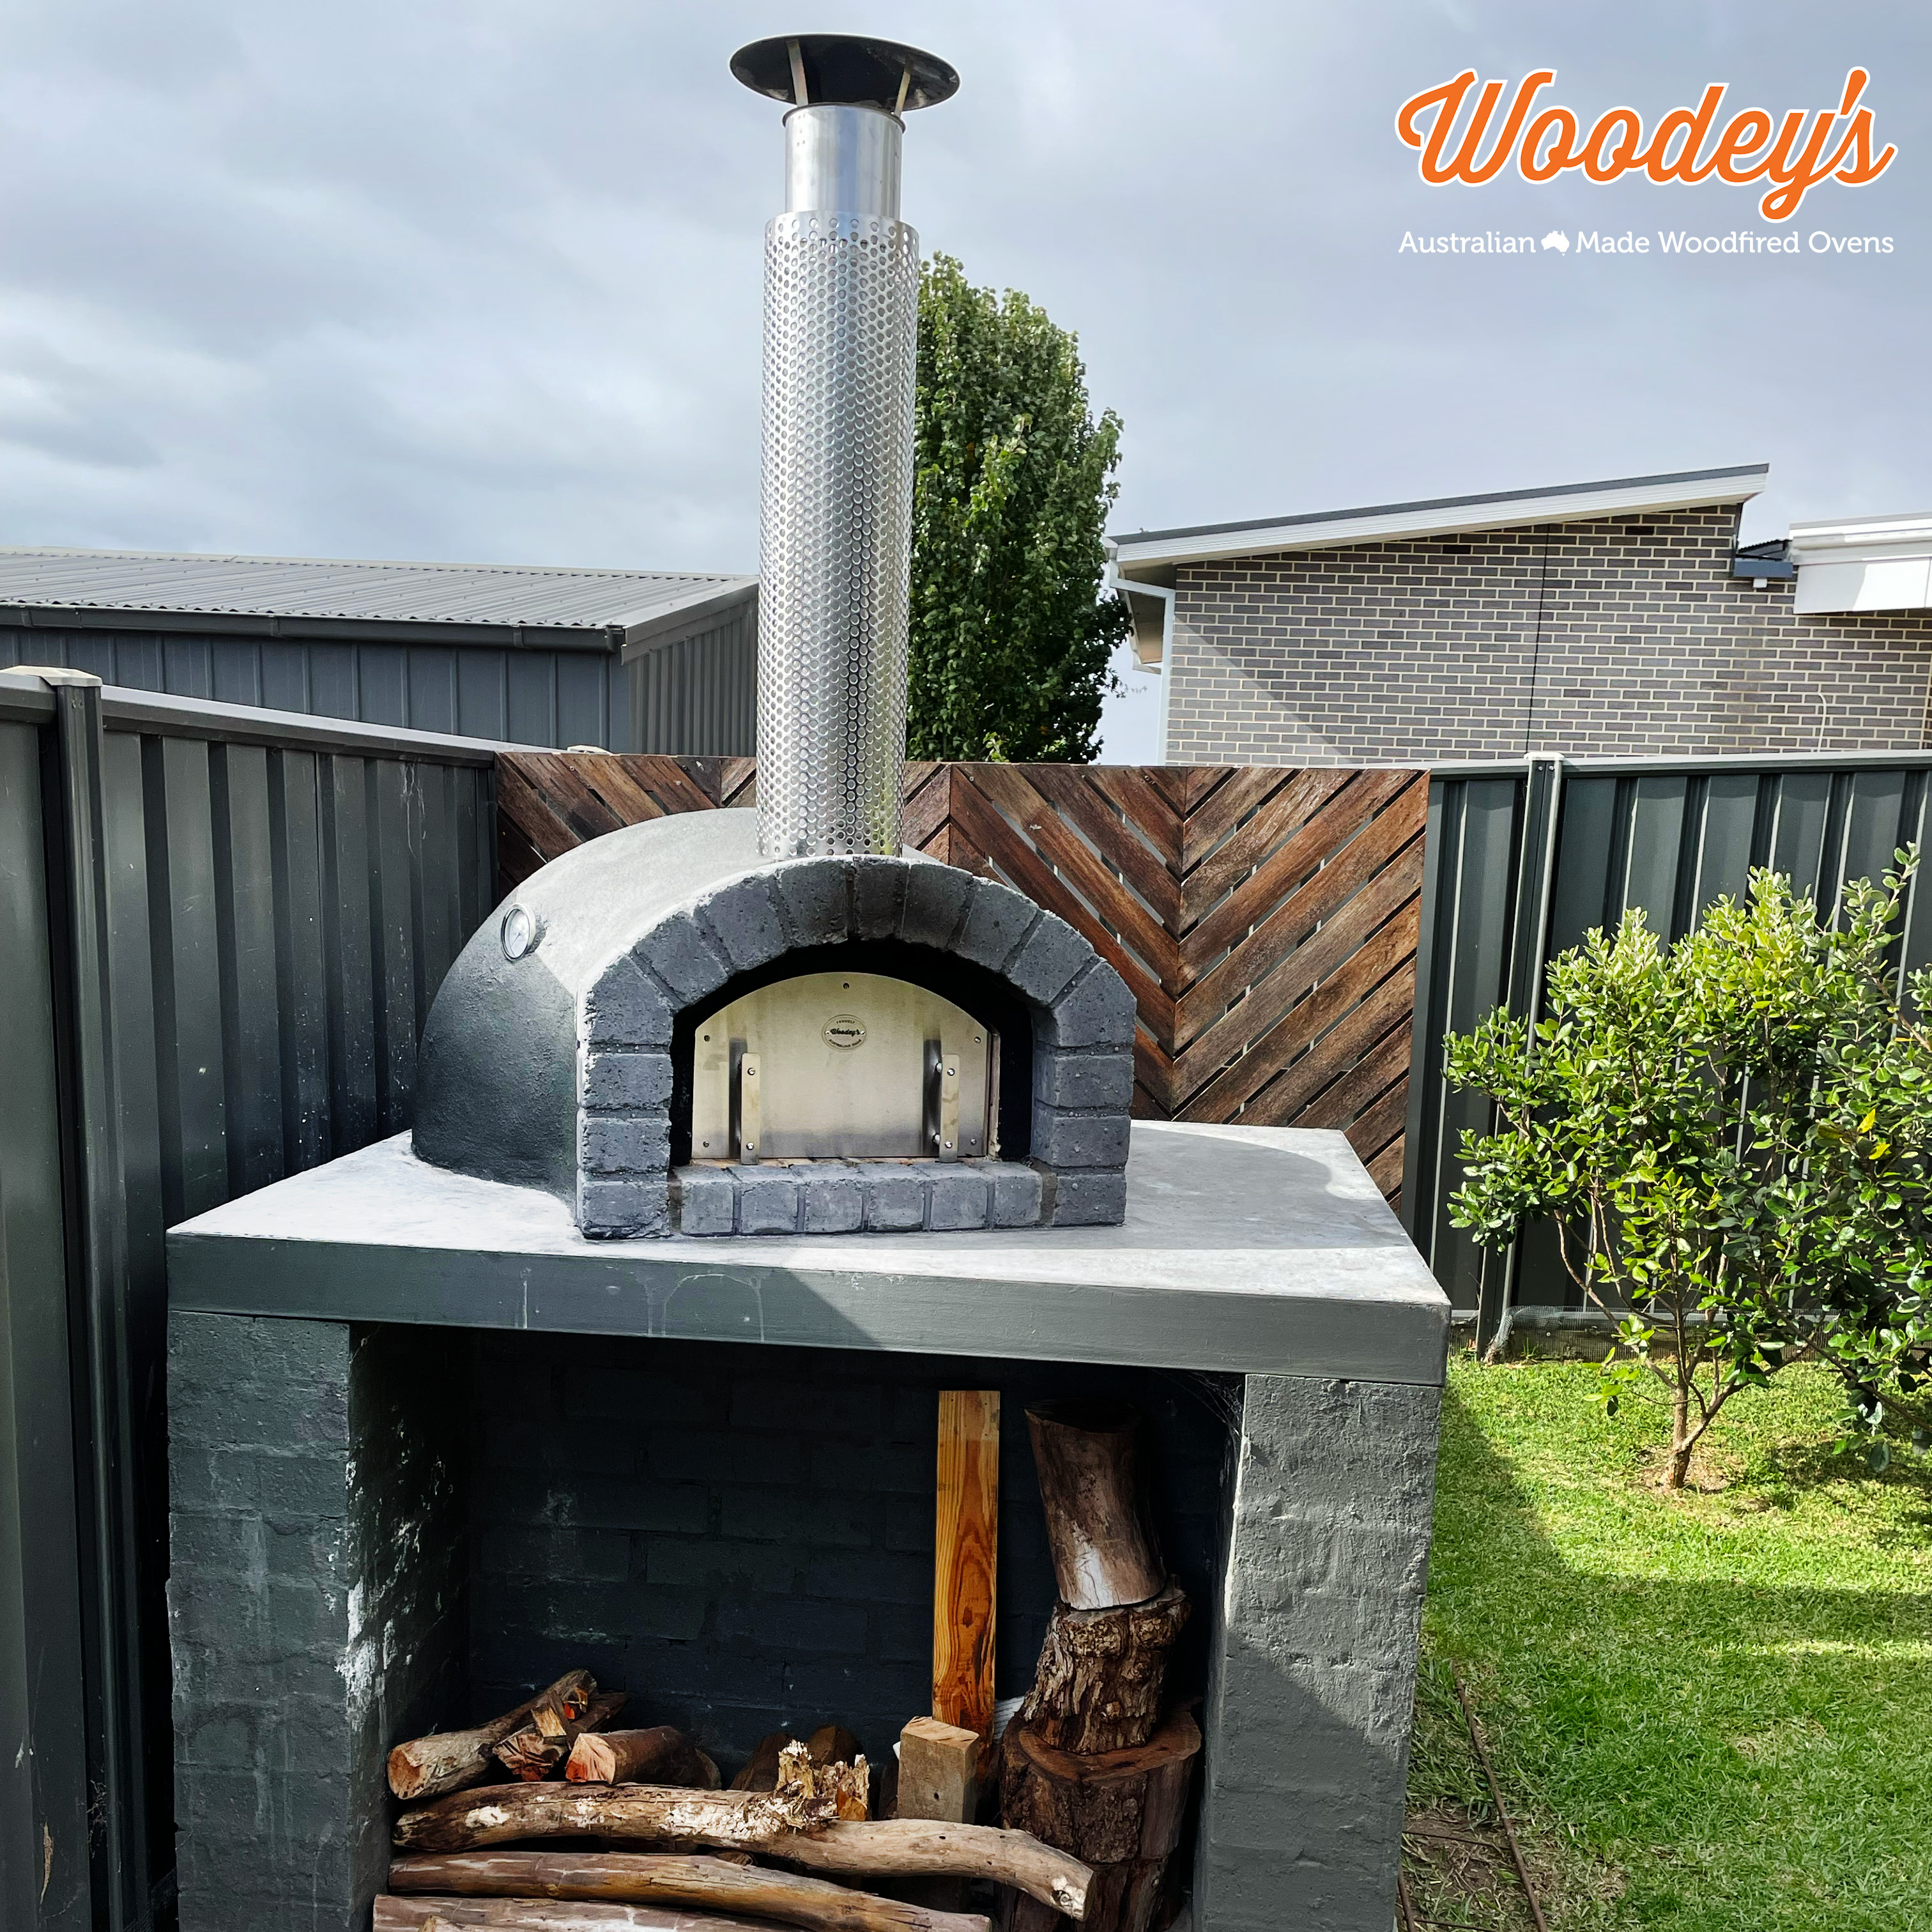 Woodey's Woodfired Ovens – Australian Made Pizza Ovens